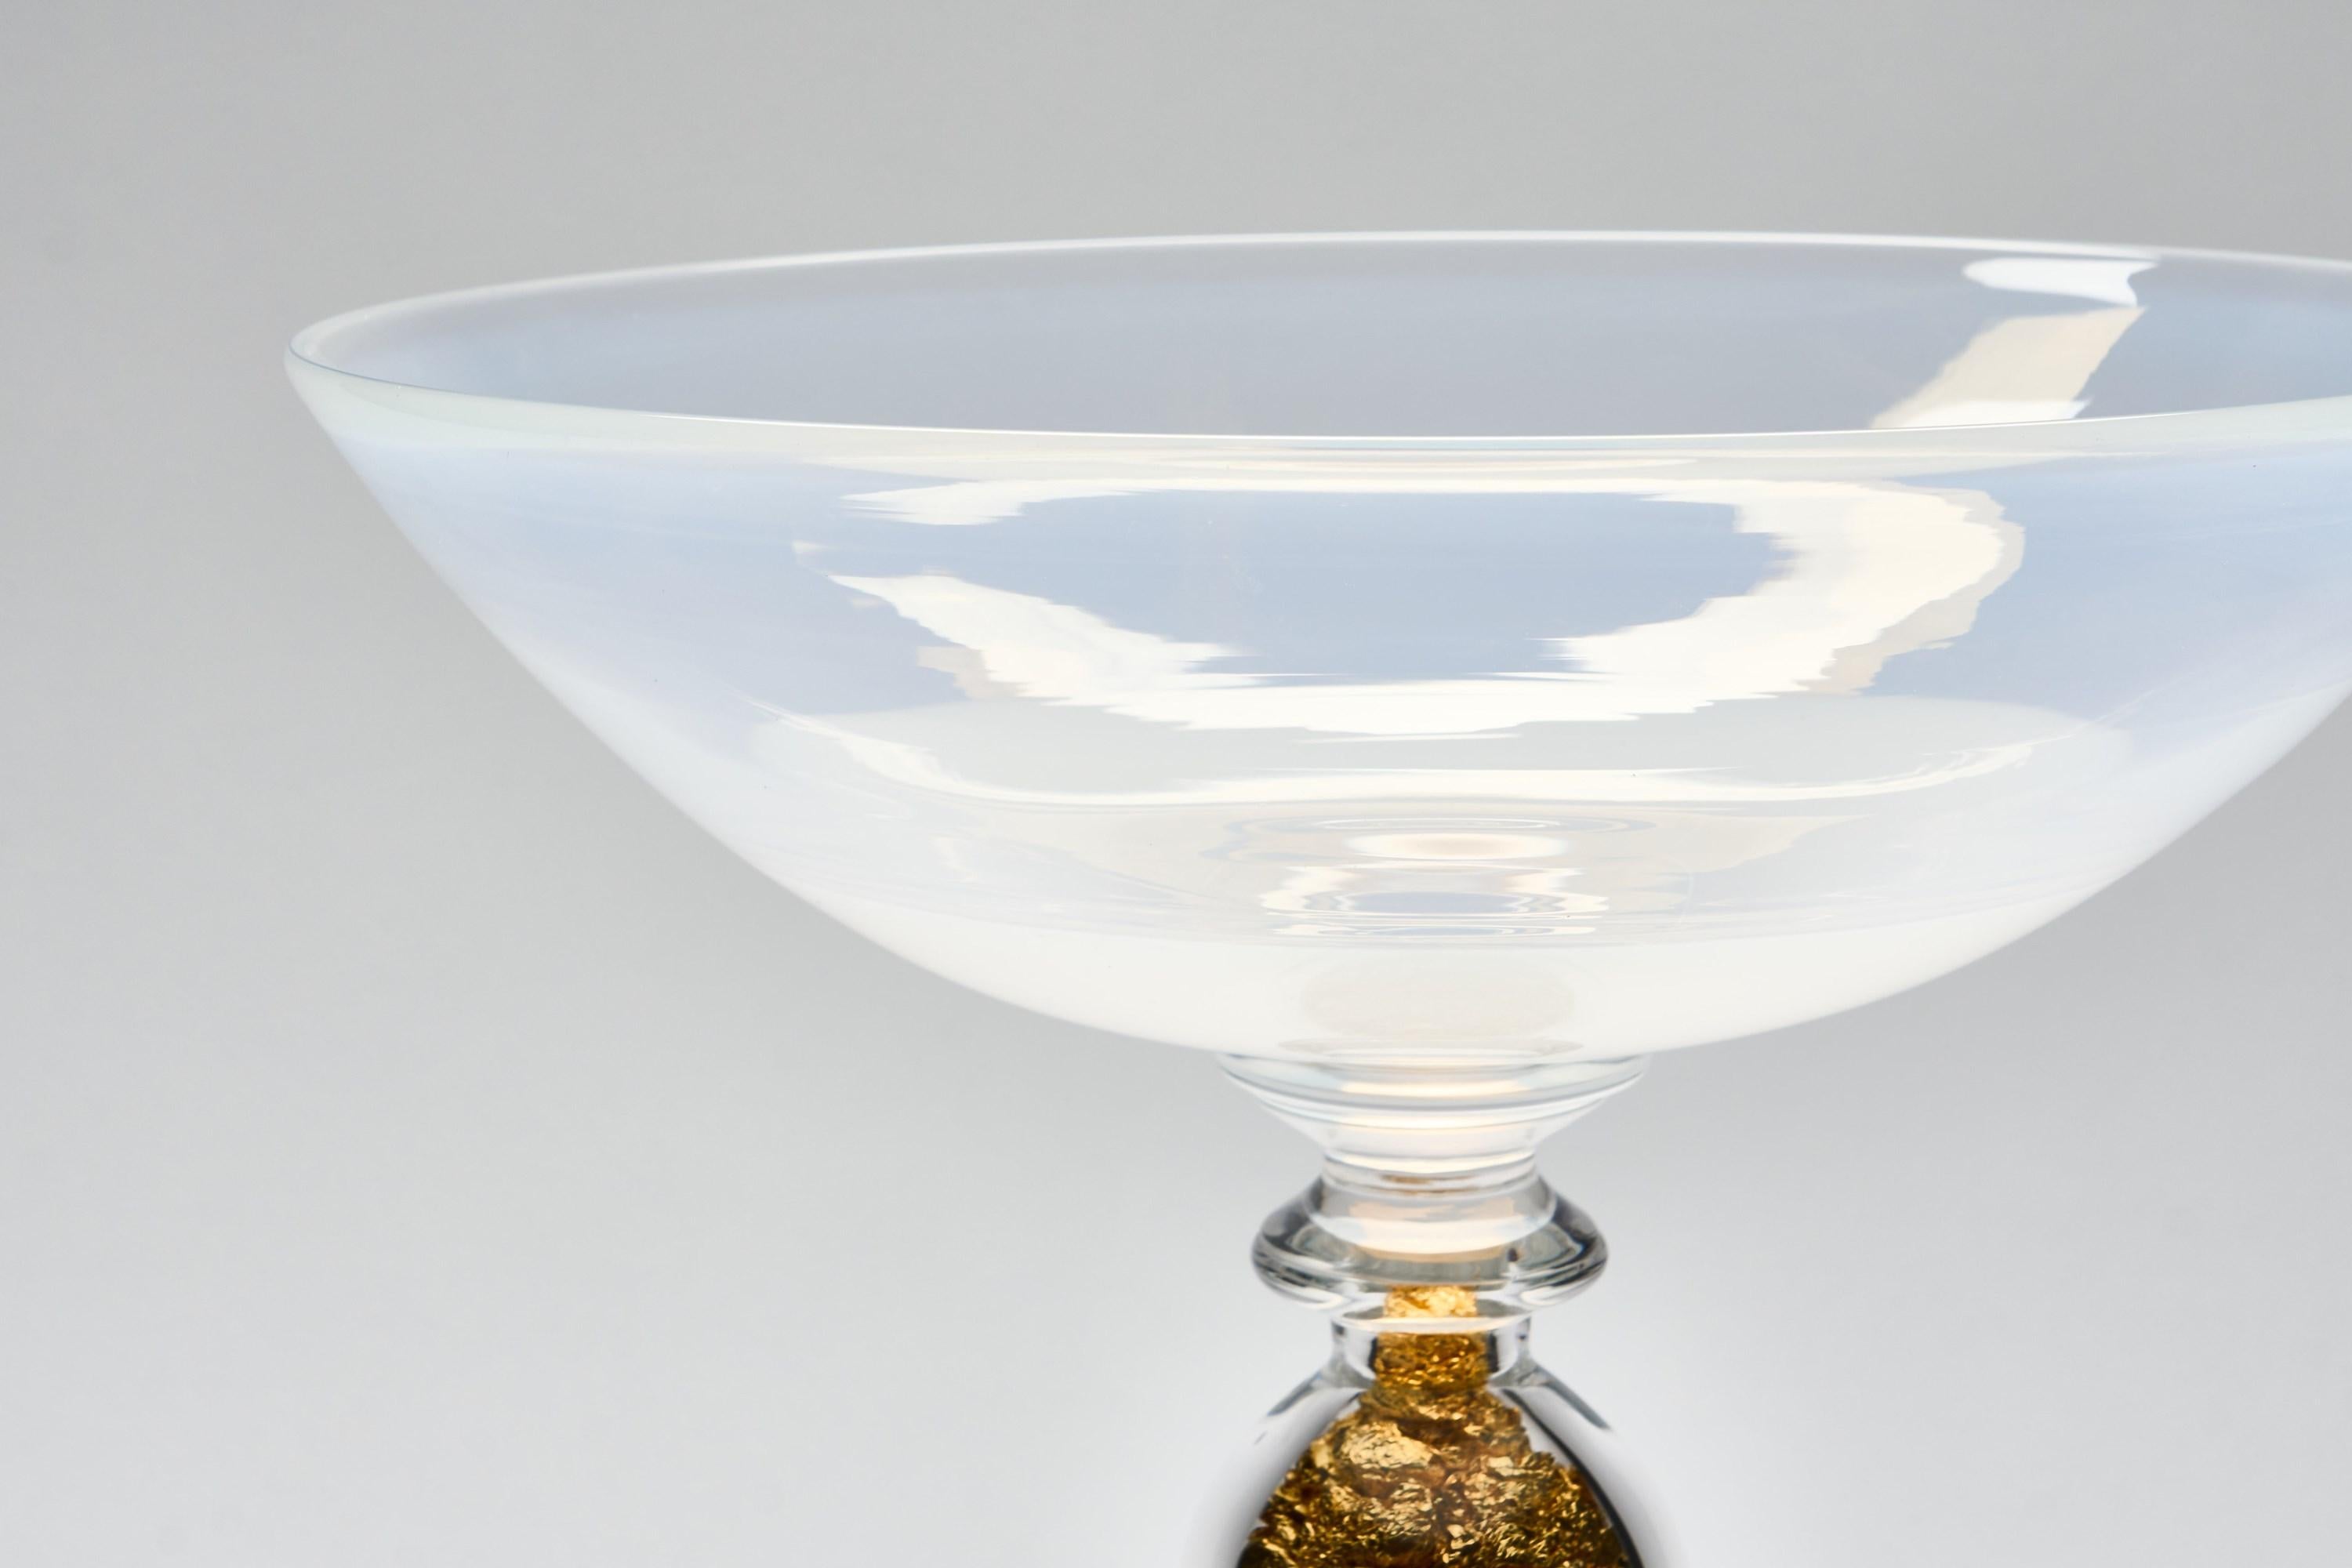 Gambo d’Oro, a milky white glass & gold leaf centrepiece by Anthony Scala For Sale 2